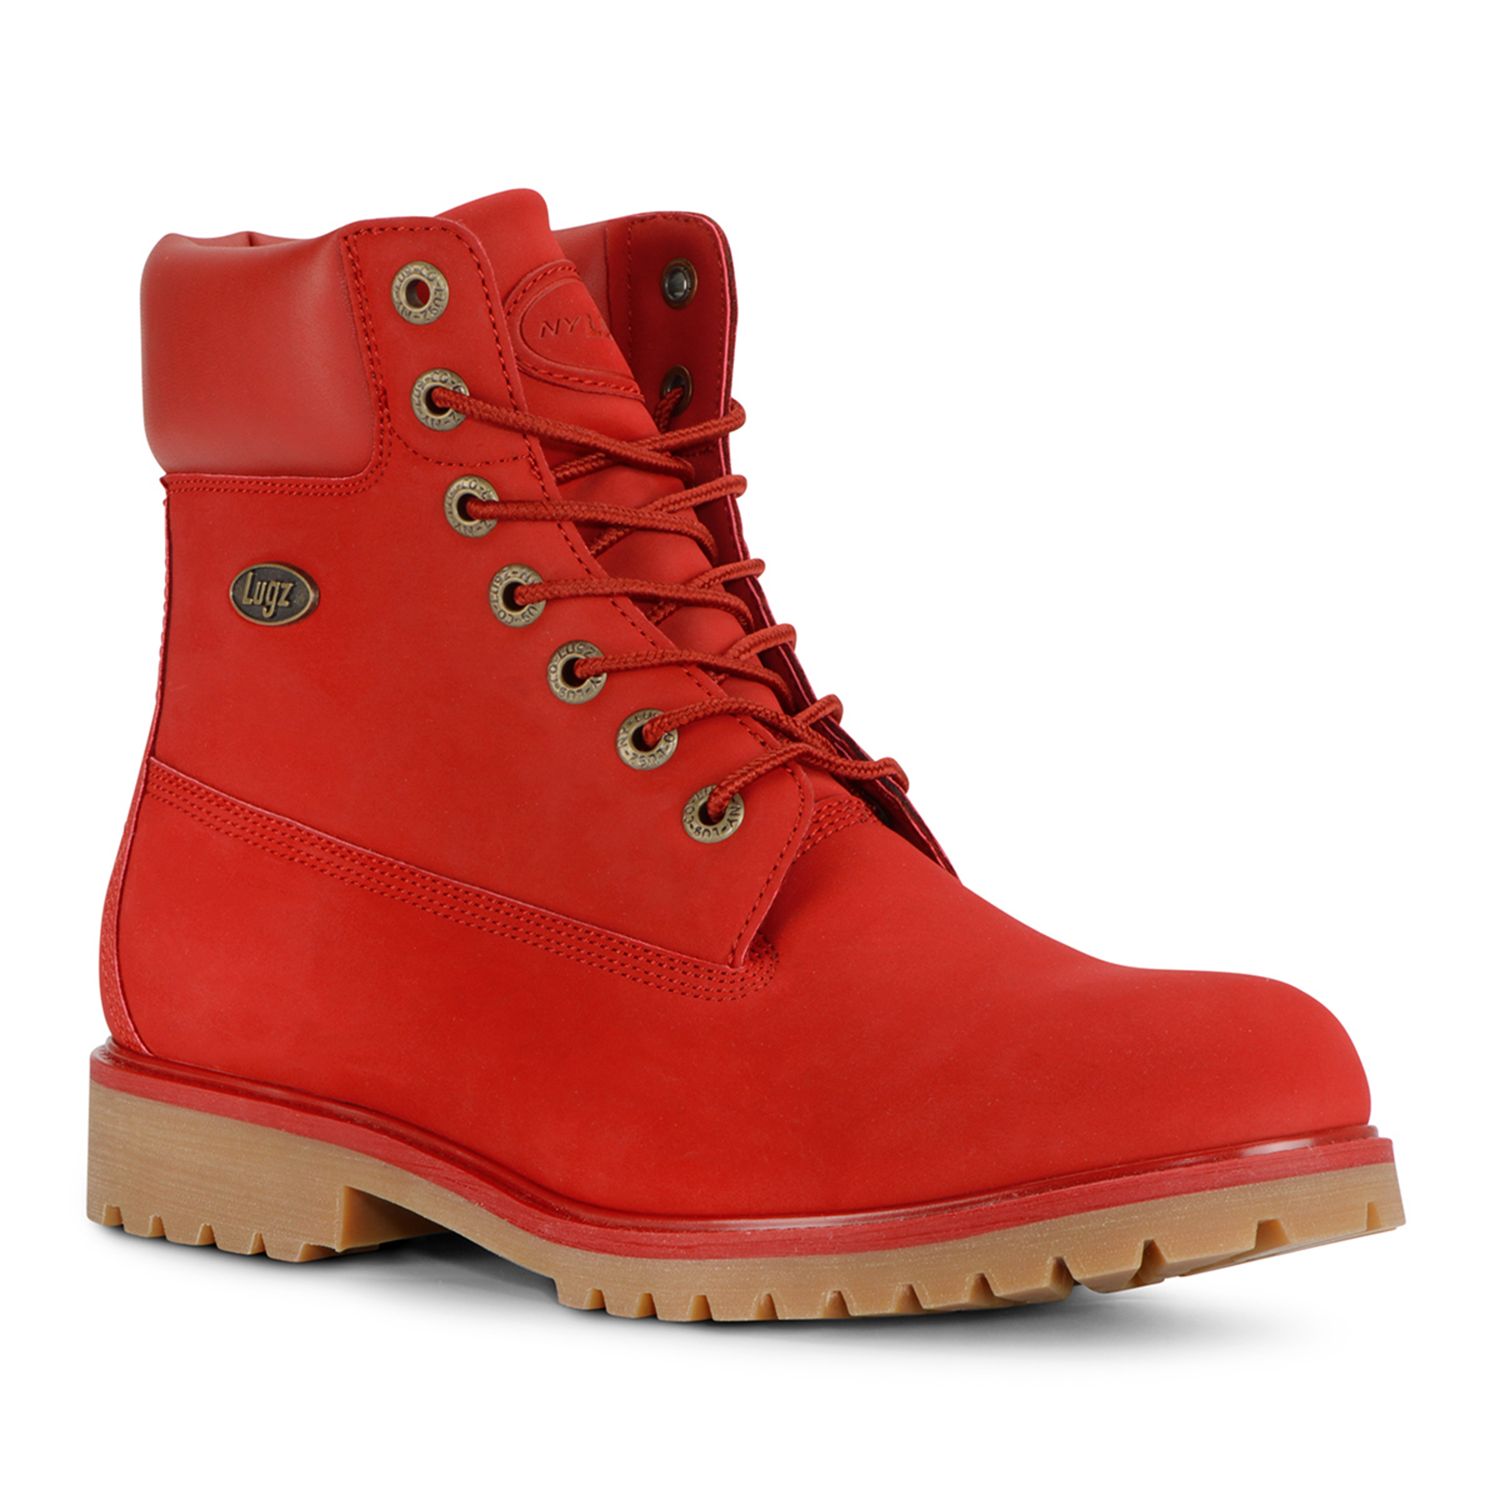 Red Lugz Boots - Shoes | Kohl's